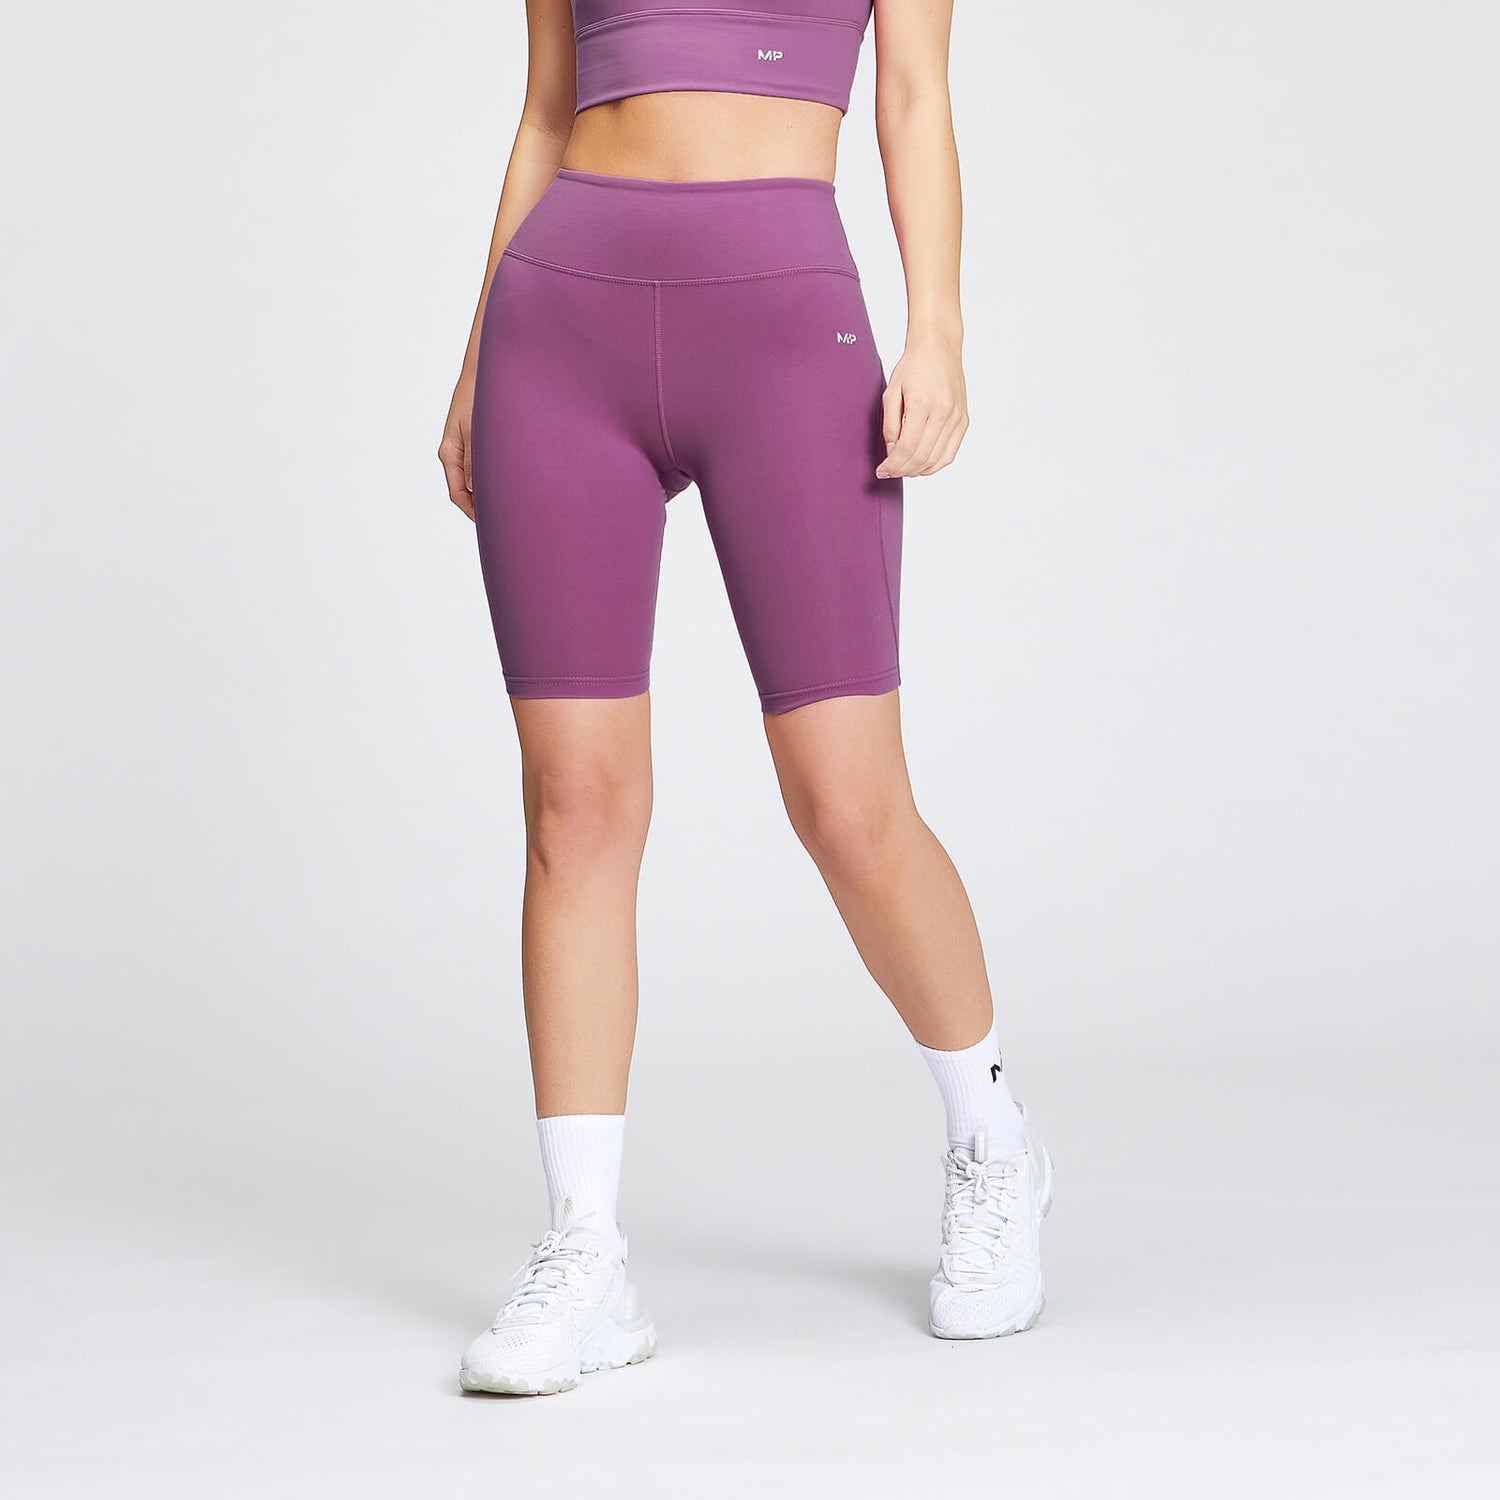 MP Women's Power Cycling Shorts - Orchid - S